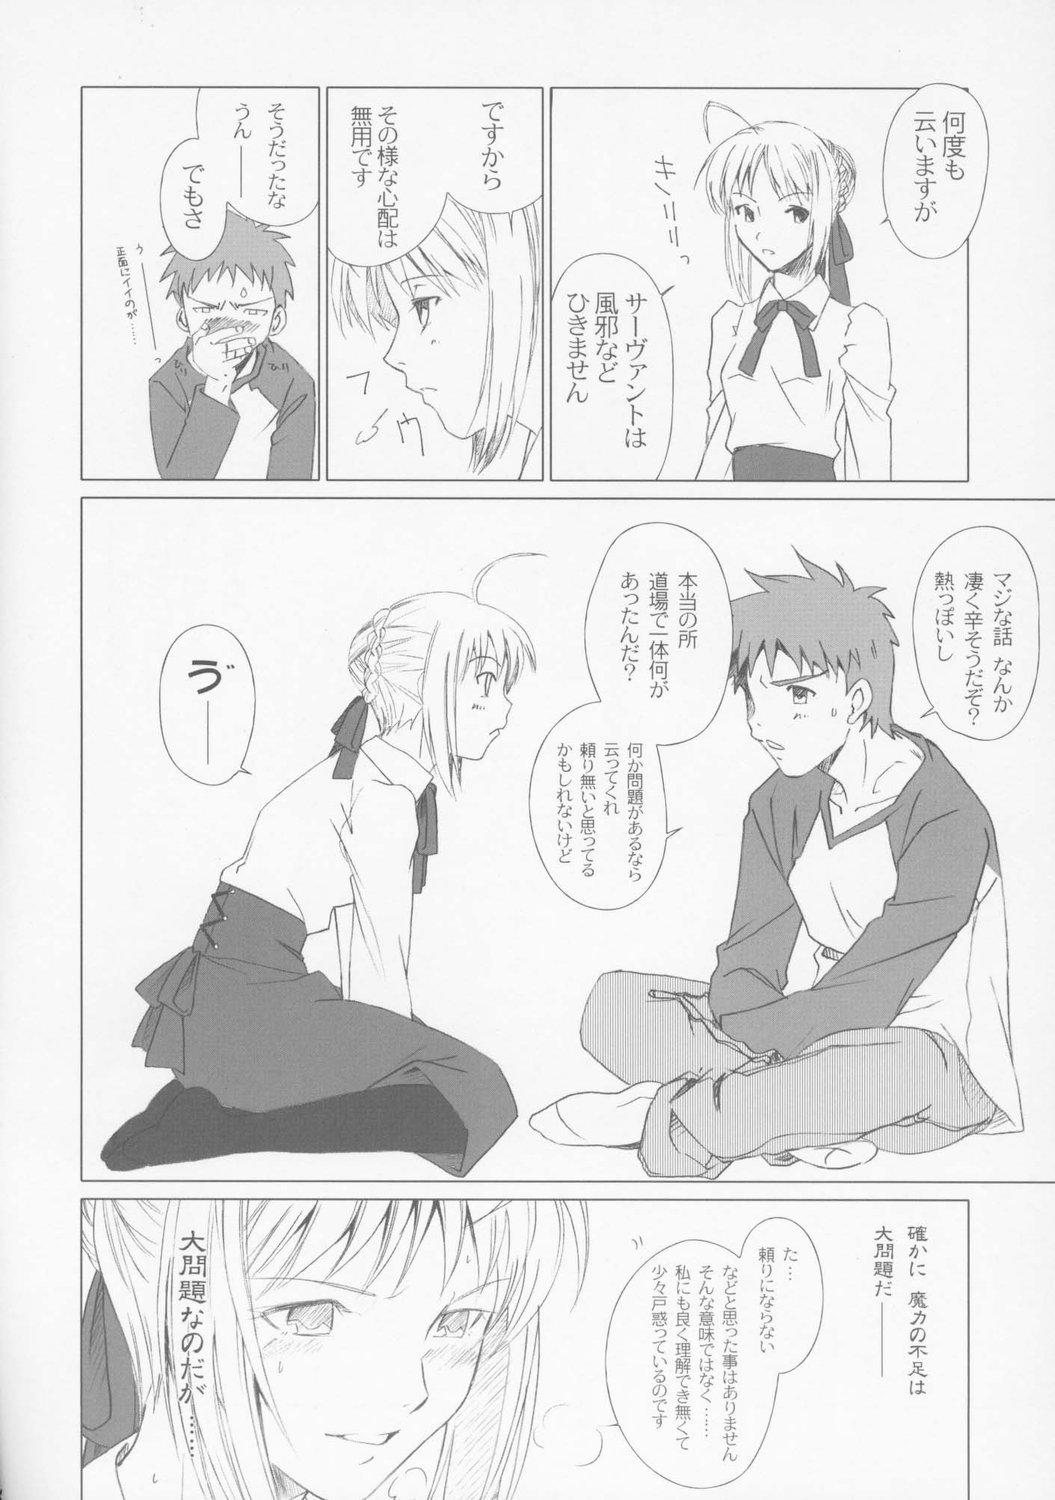 Roundass Eien no Uta - Ever Song - Fate stay night Fate hollow ataraxia Ball Busting - Page 10